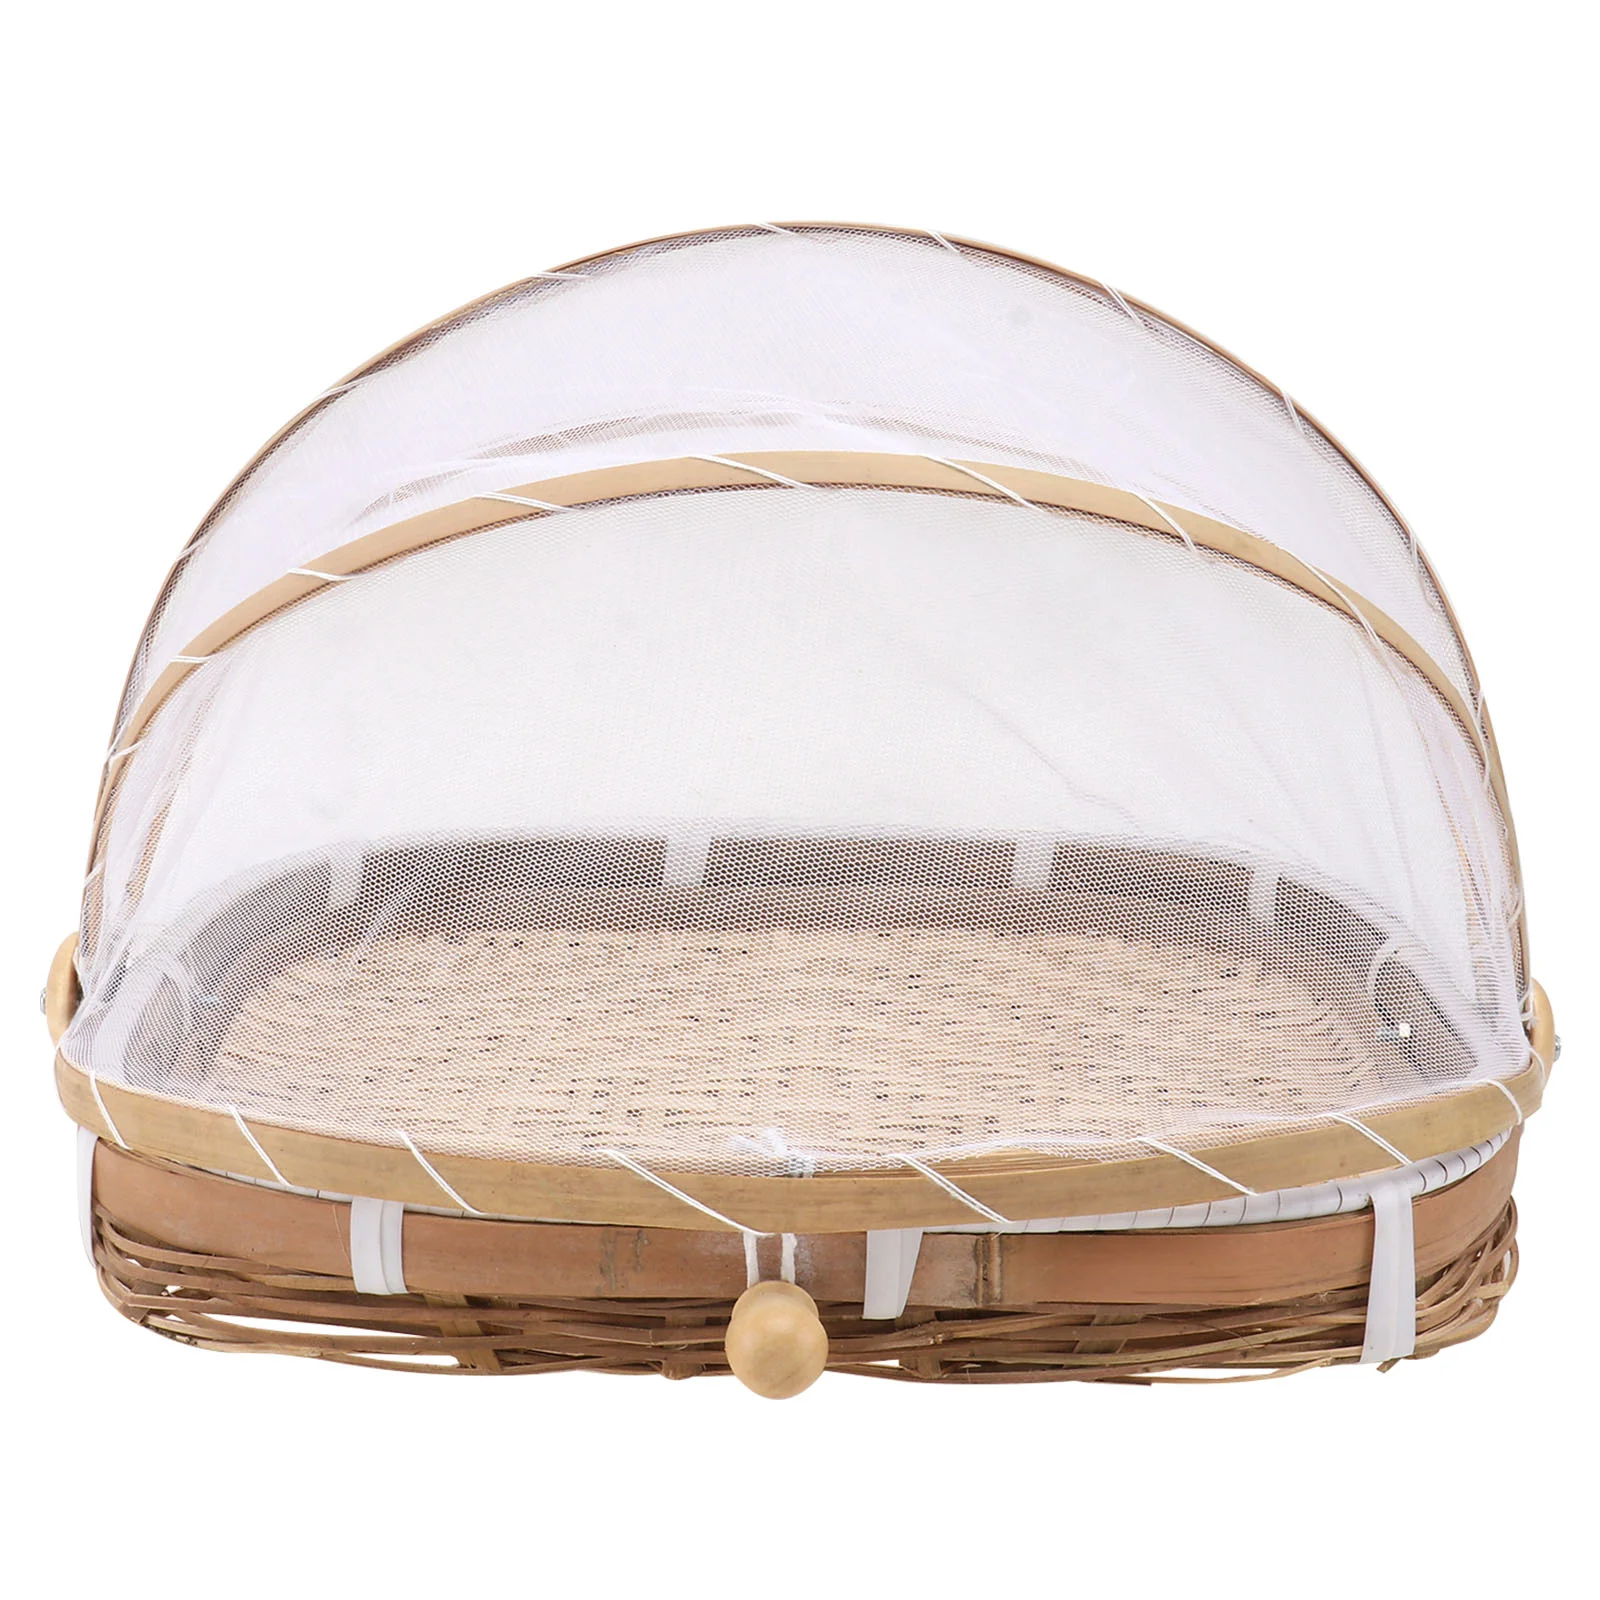 

Baskettent Woven Serving Cover Tray Round Mesh Bread Wicker Sieve Storage Fruit Rattan Dome Baskets Dustpan Container Covered